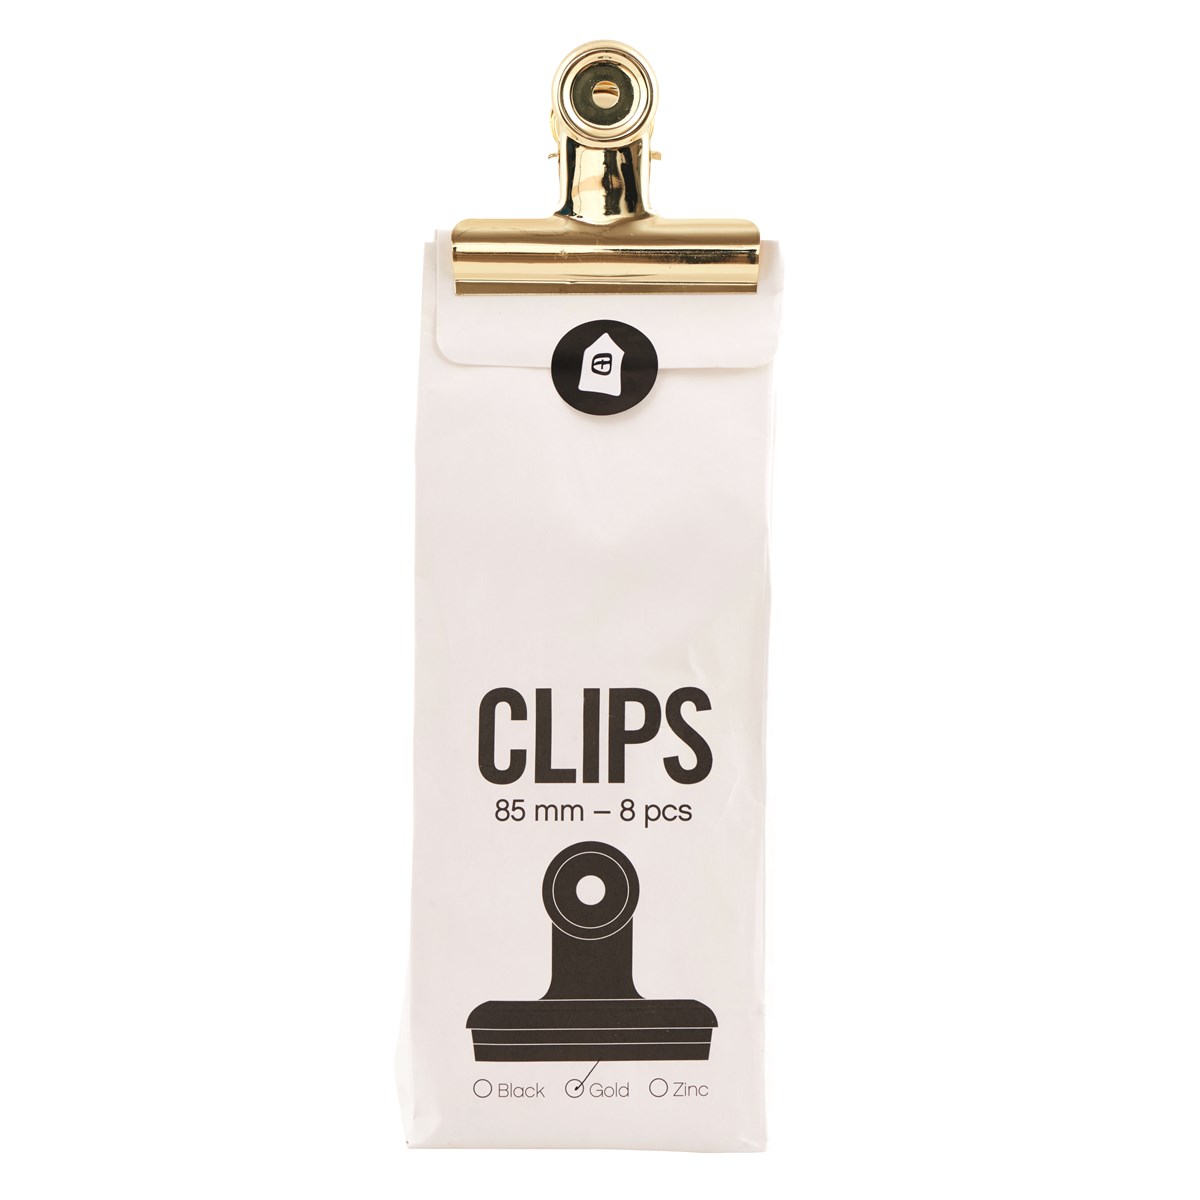 »CLIPS«  — HOUSE DOCTOR